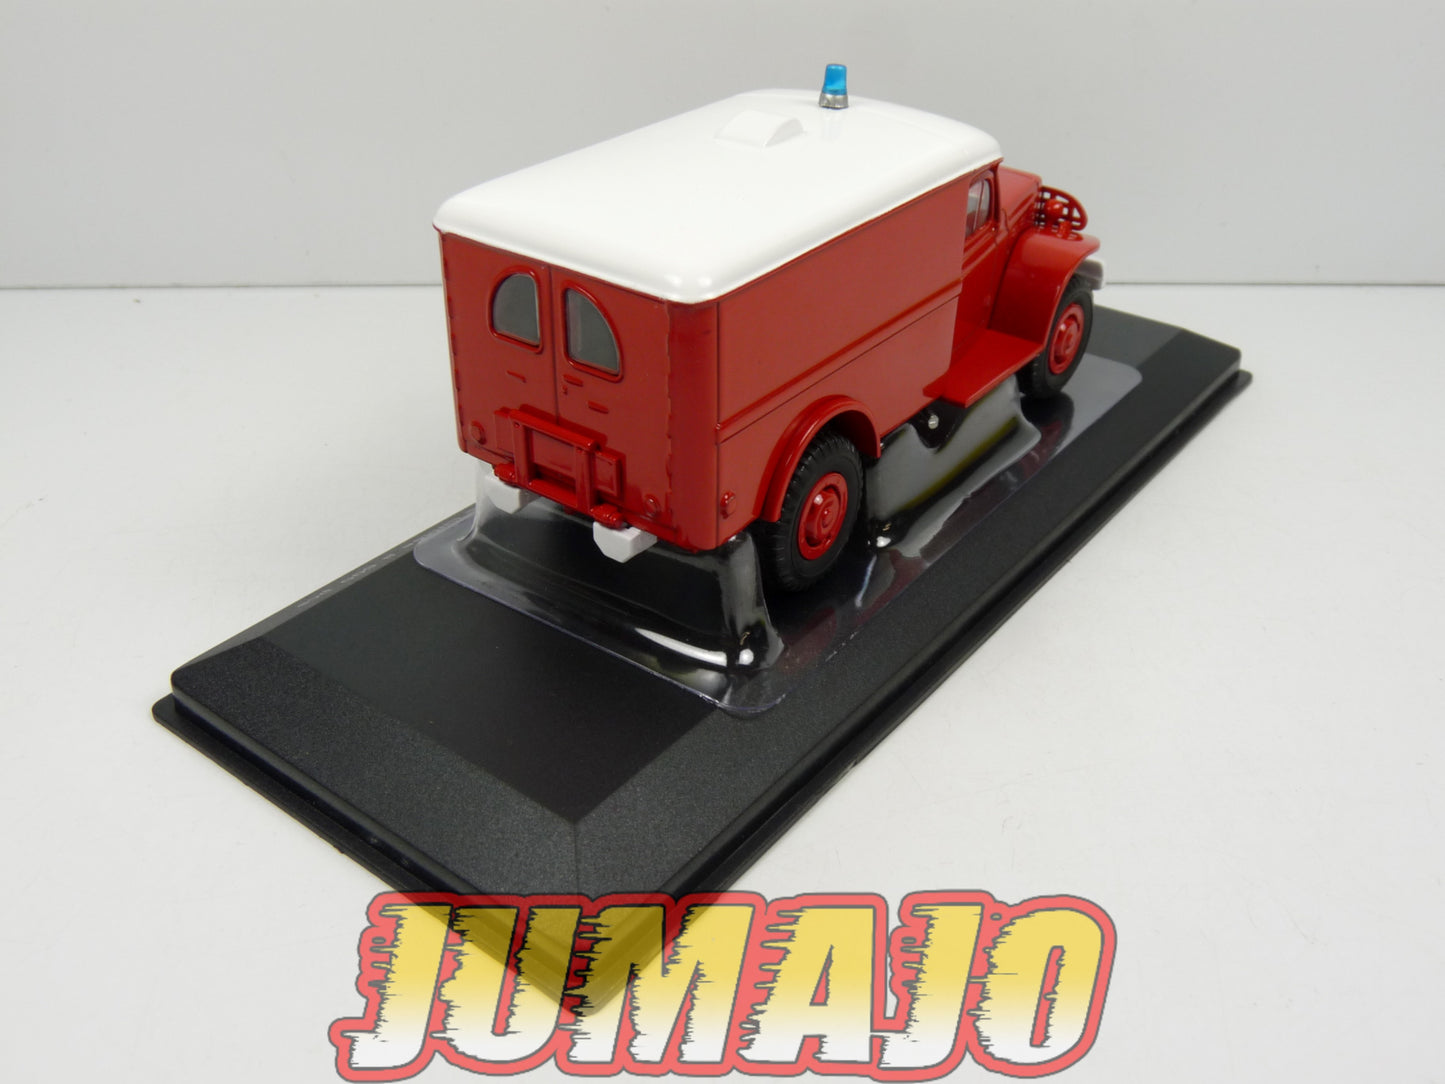 OD93 VOITURE 1/43 ODEON : DODGE WC54 Firetruck Pompiers